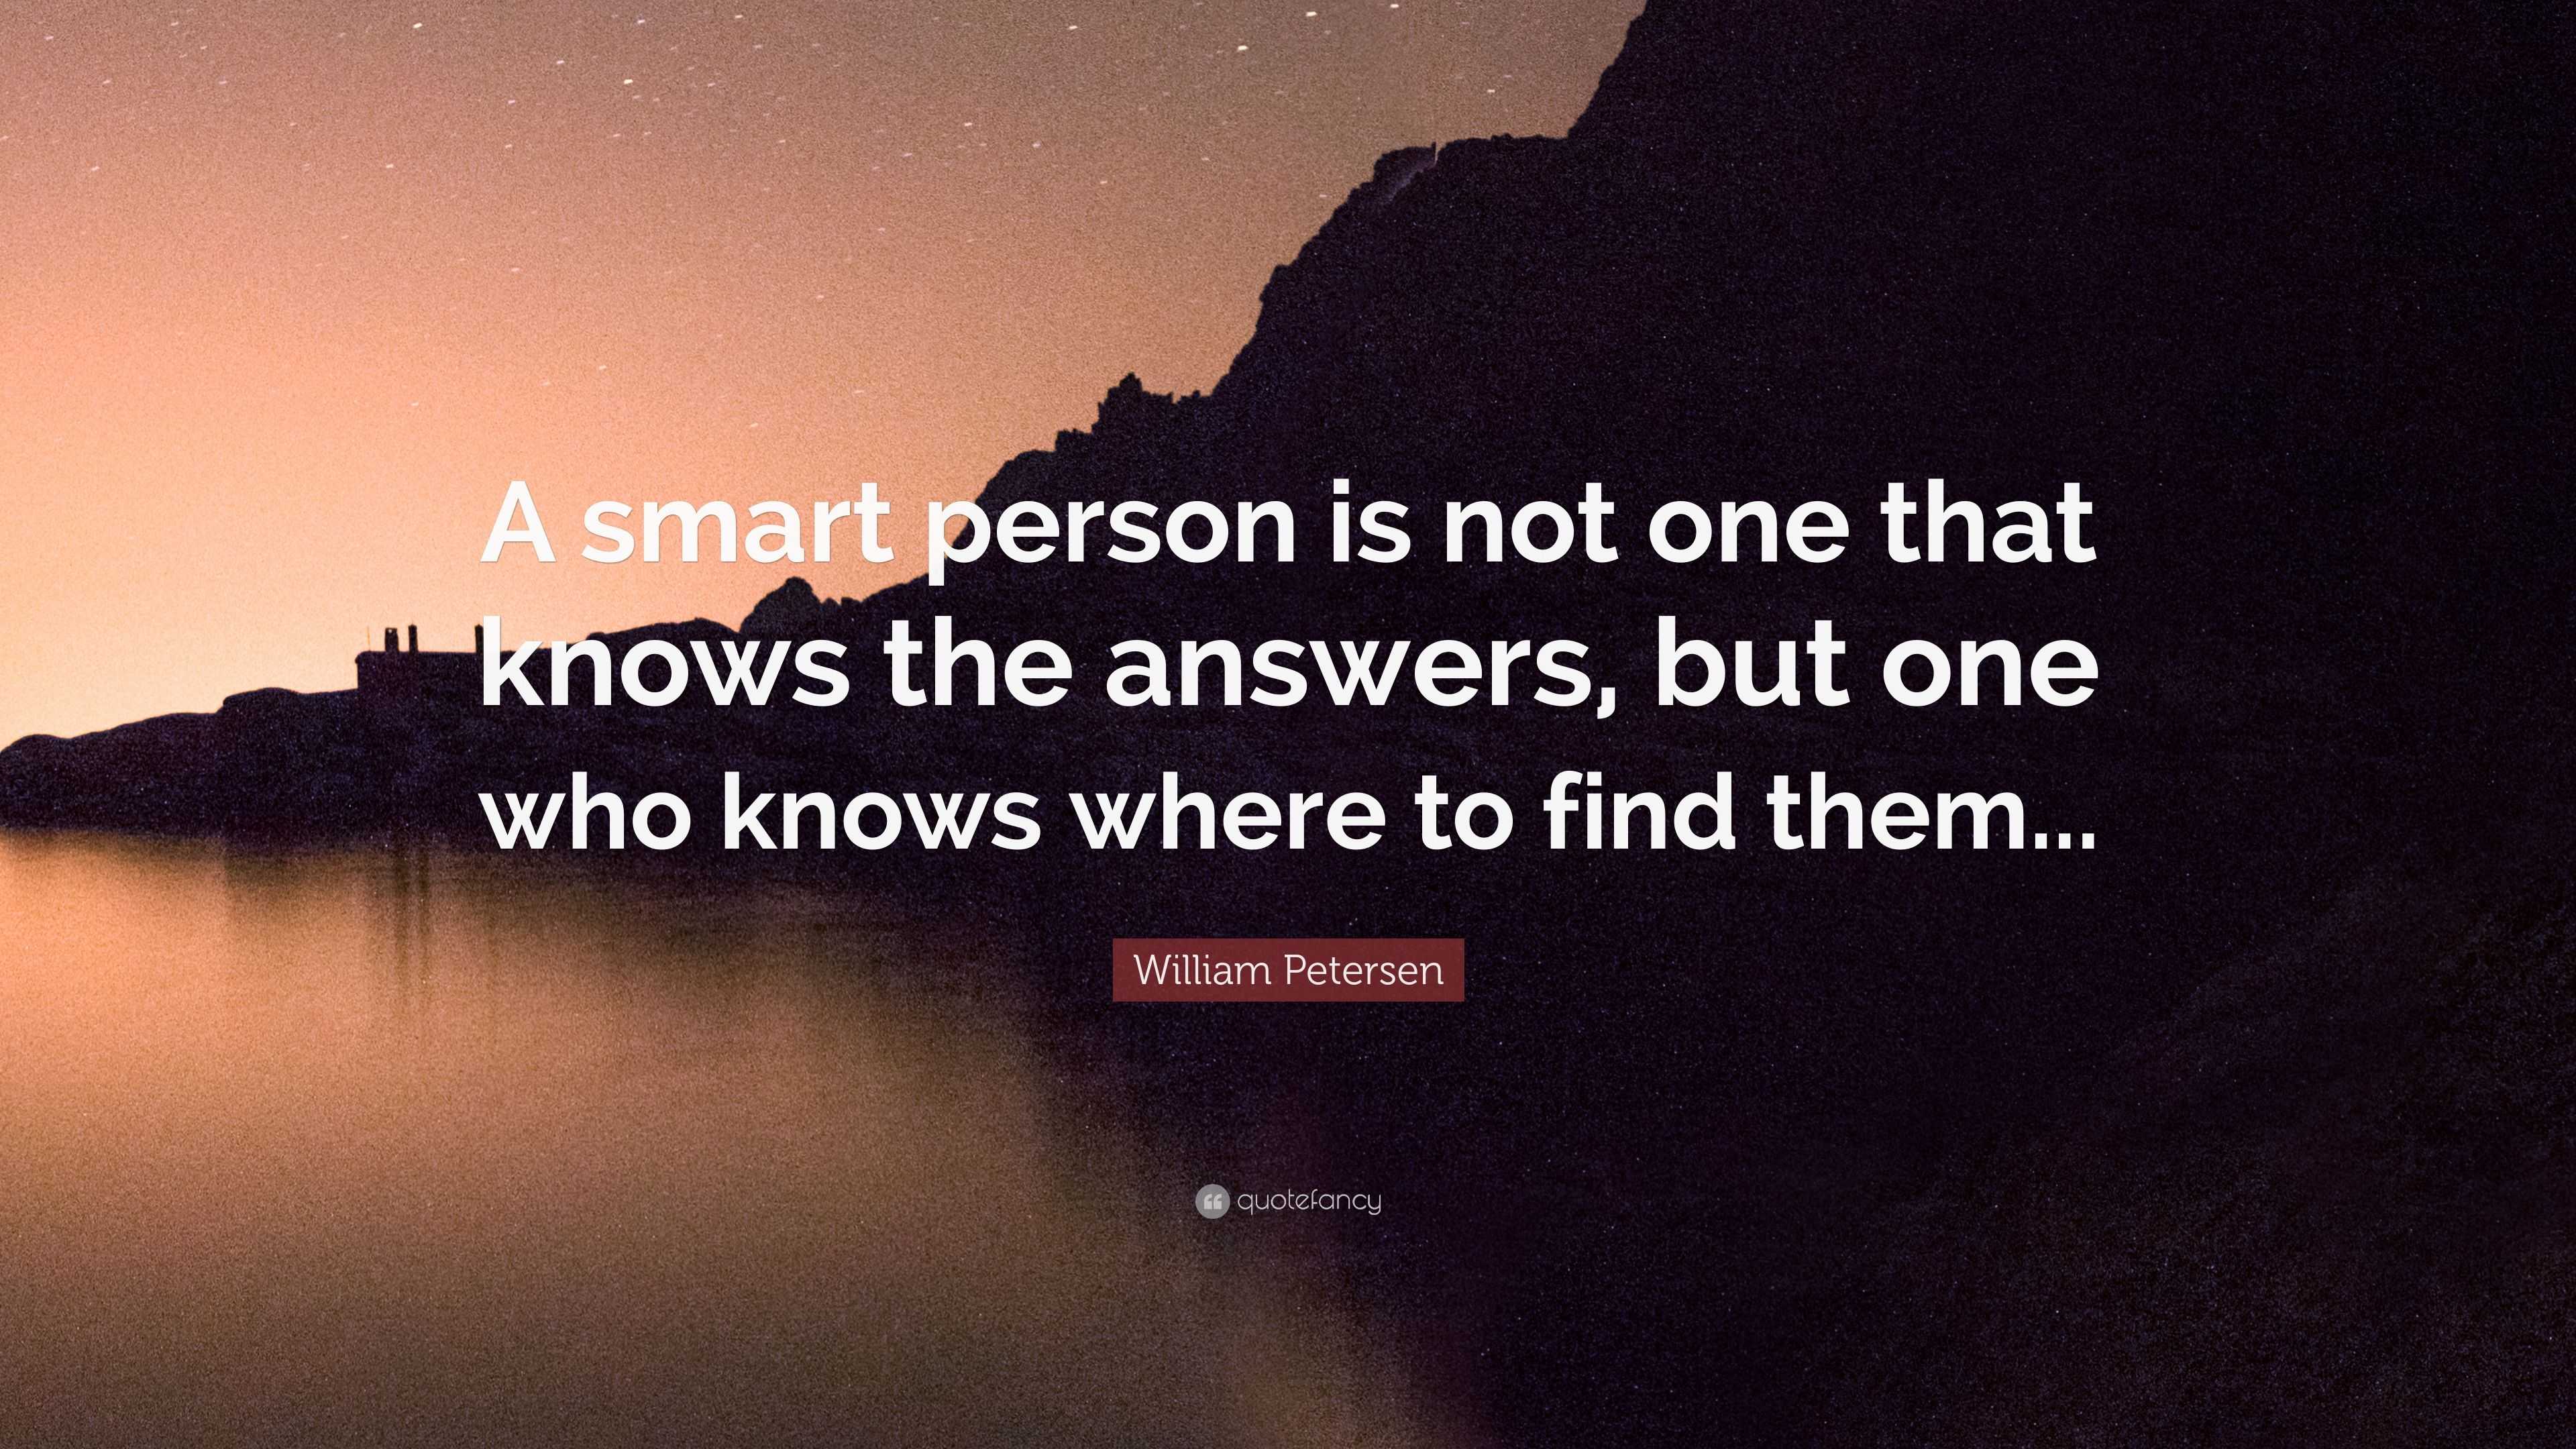 William Petersen Quote “A smart person is not one that